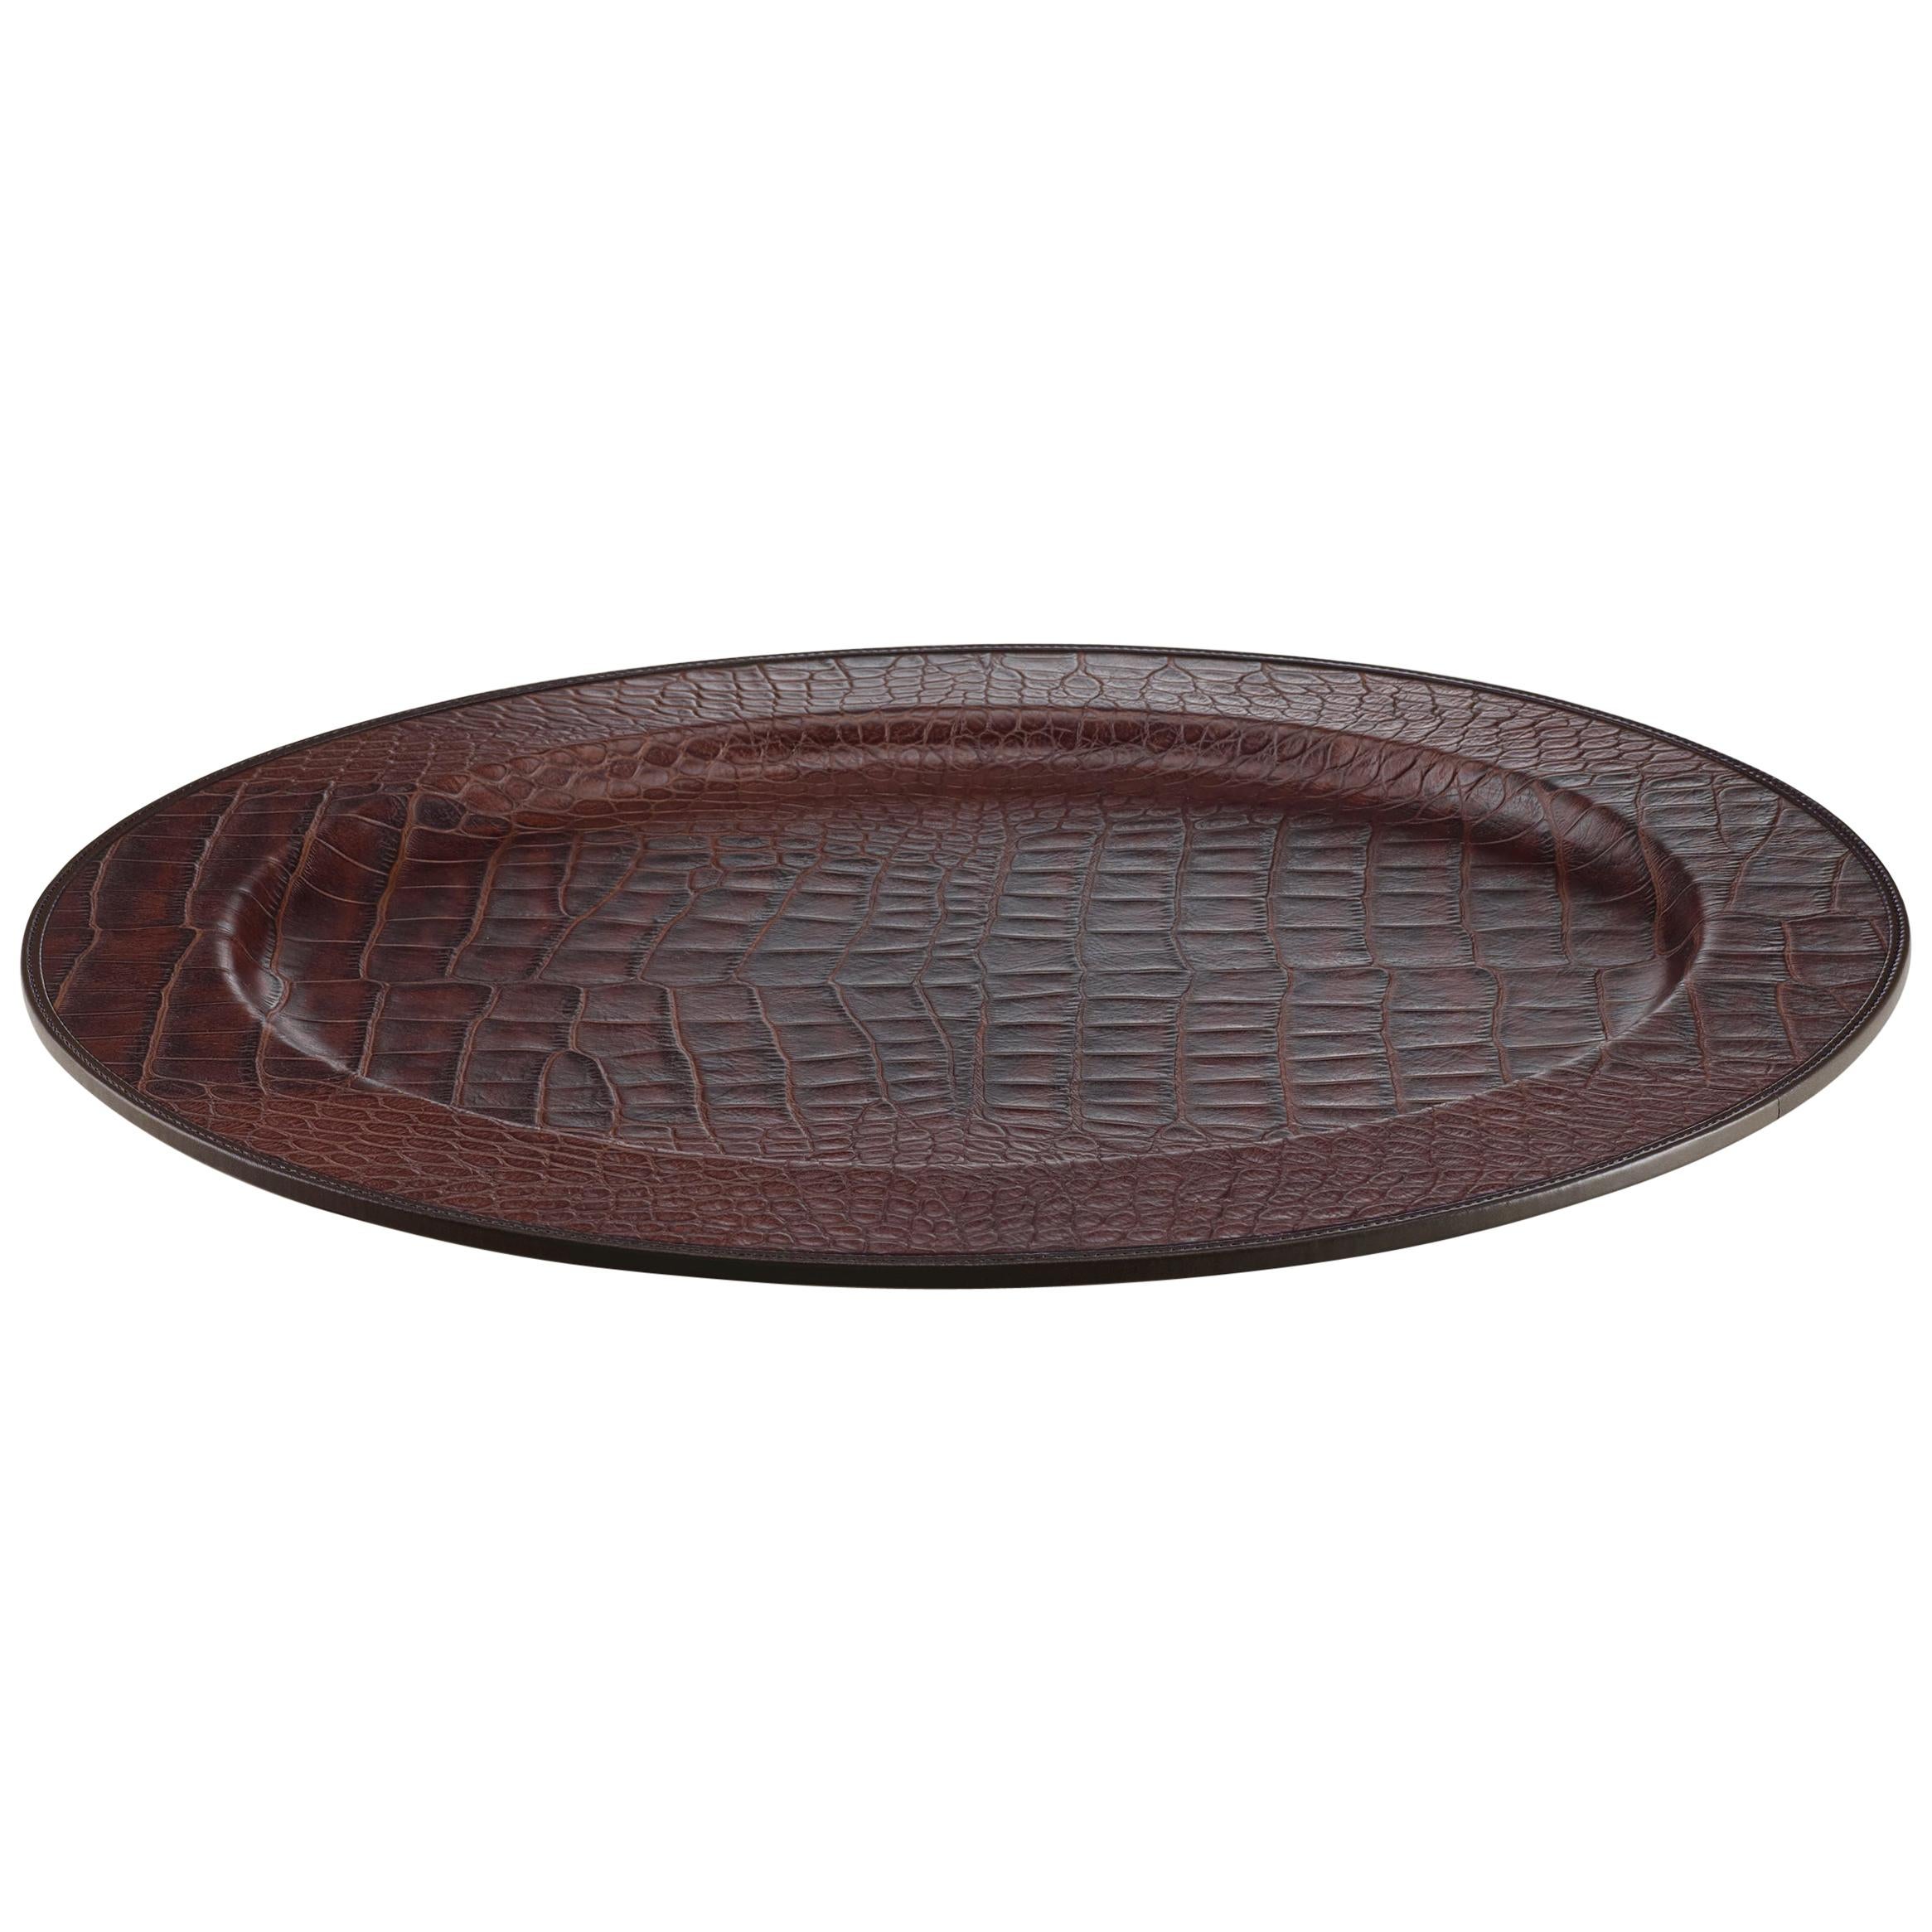 For Sale: Red (cocco bordeaux leather.jpg) Promemoria Mercurio Tray in Leather by Romeo Rozzi